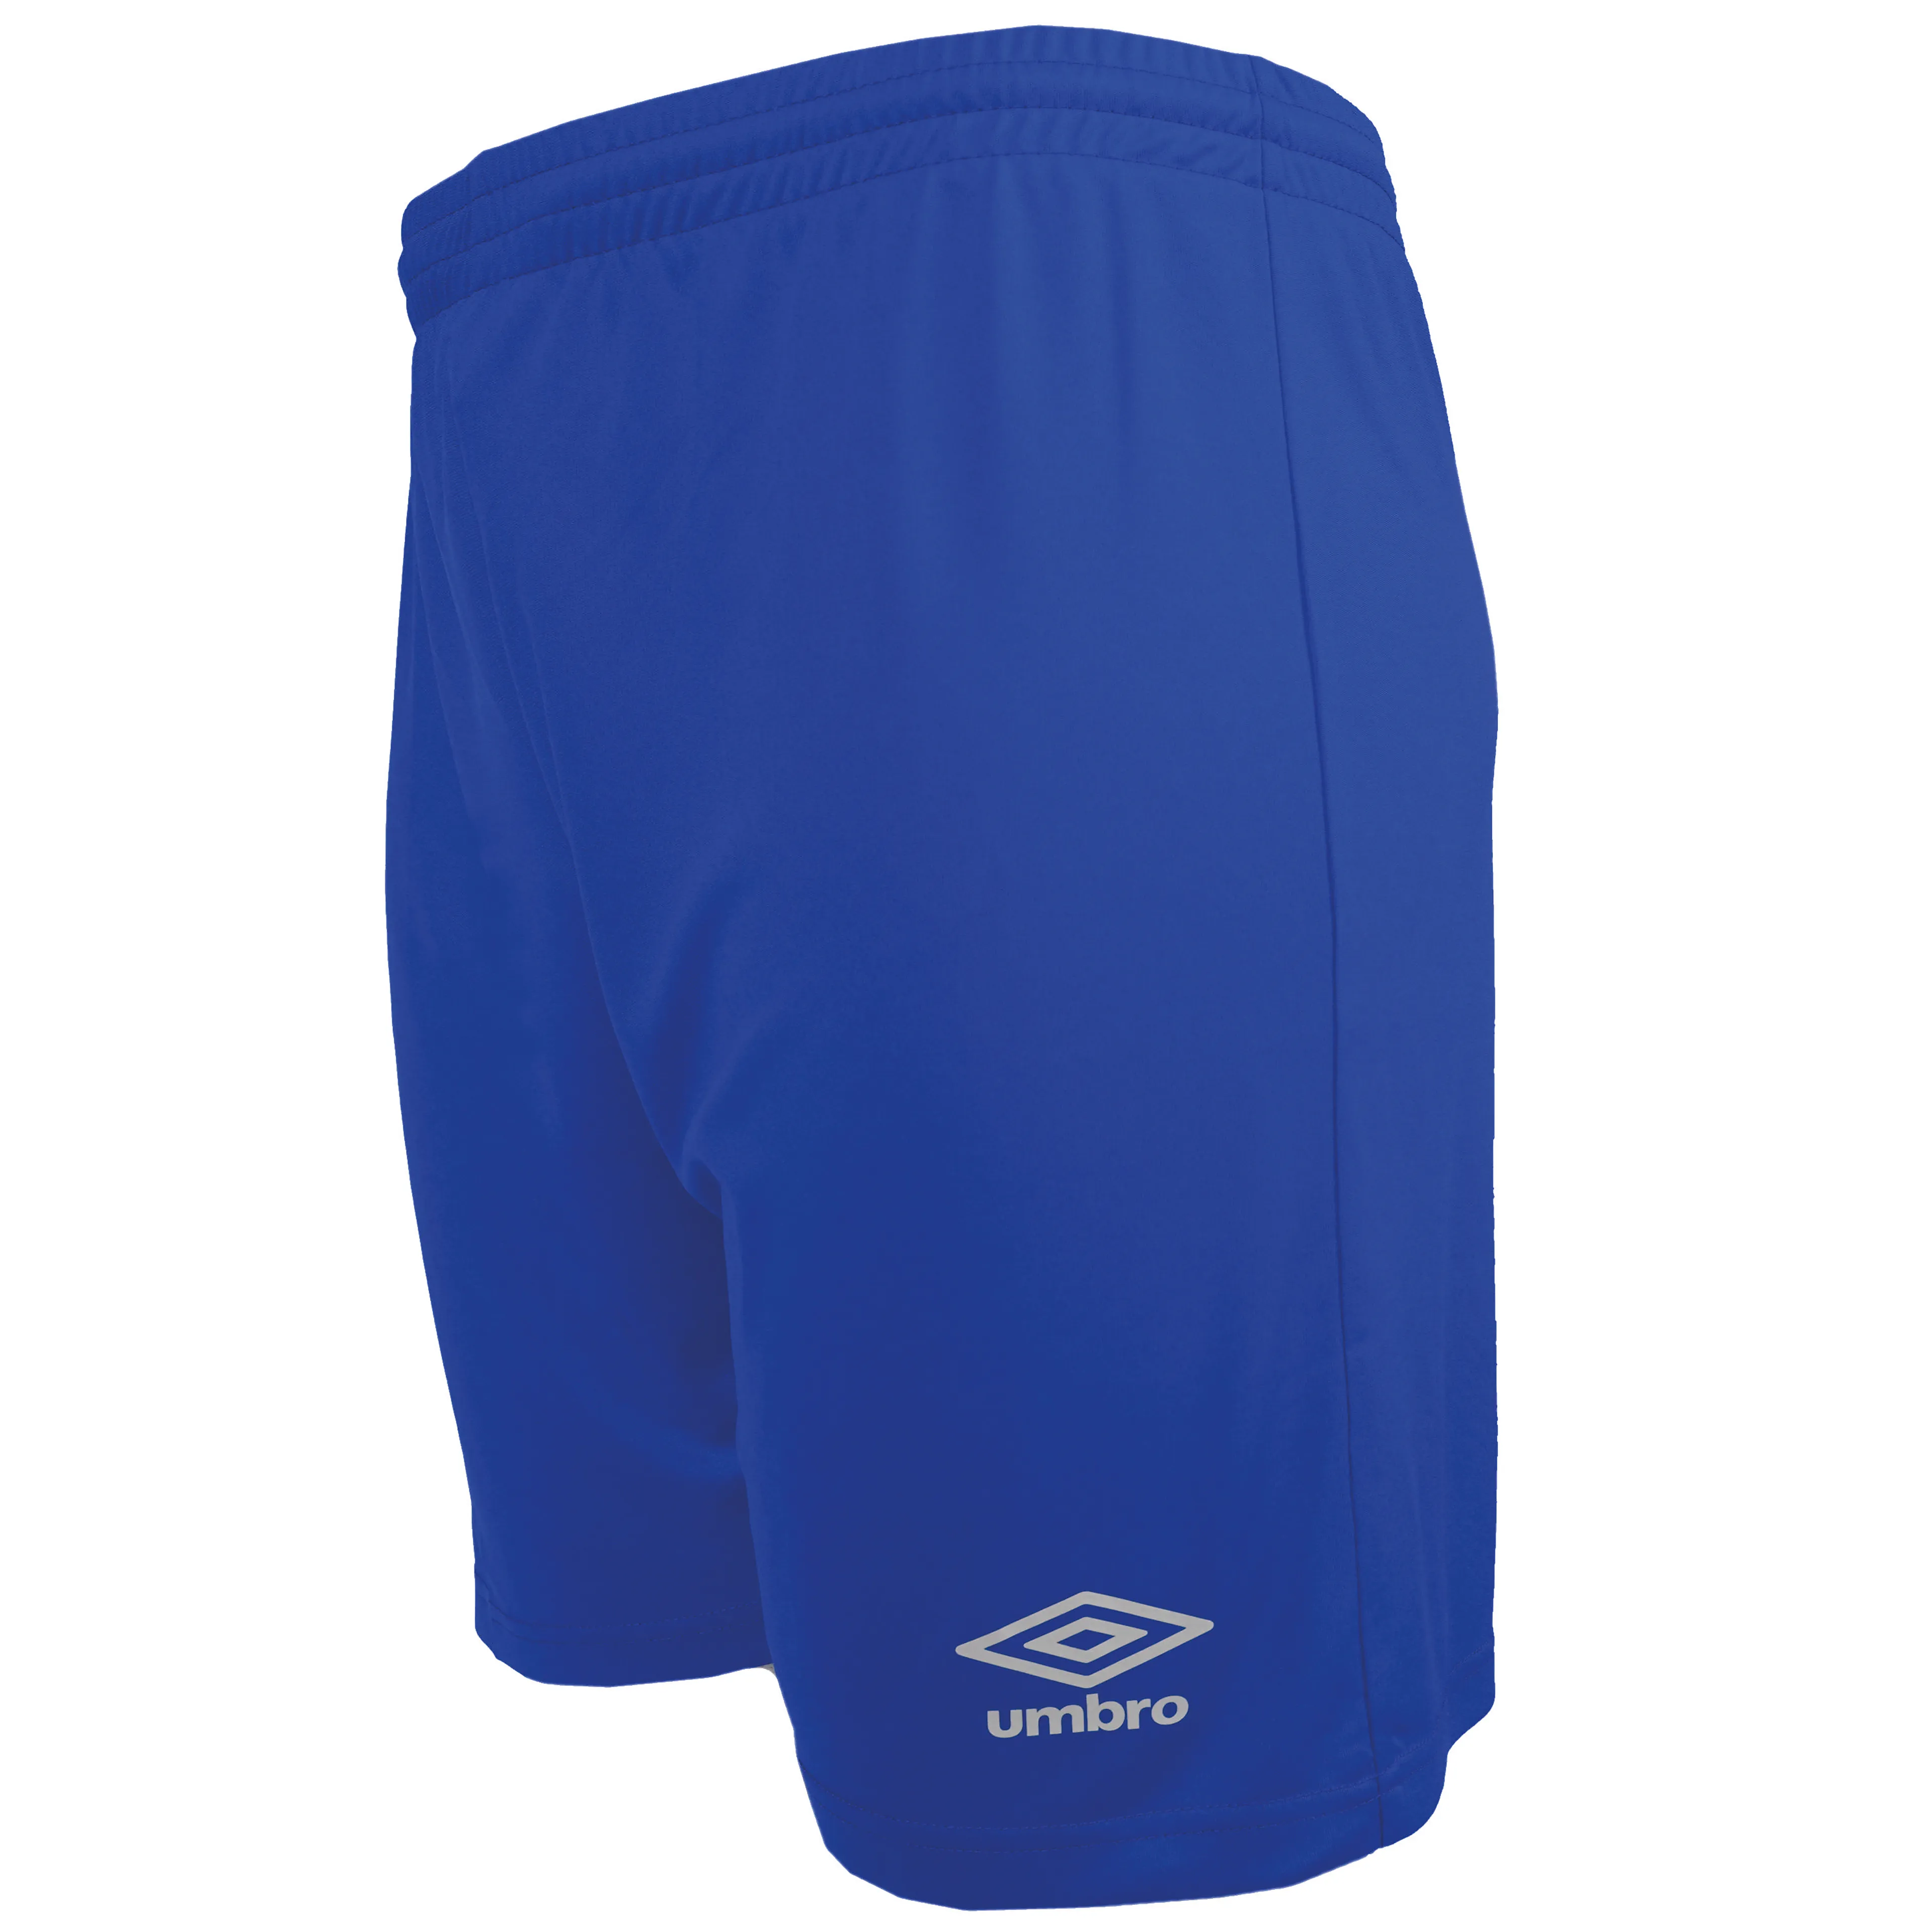 Cup Shorts